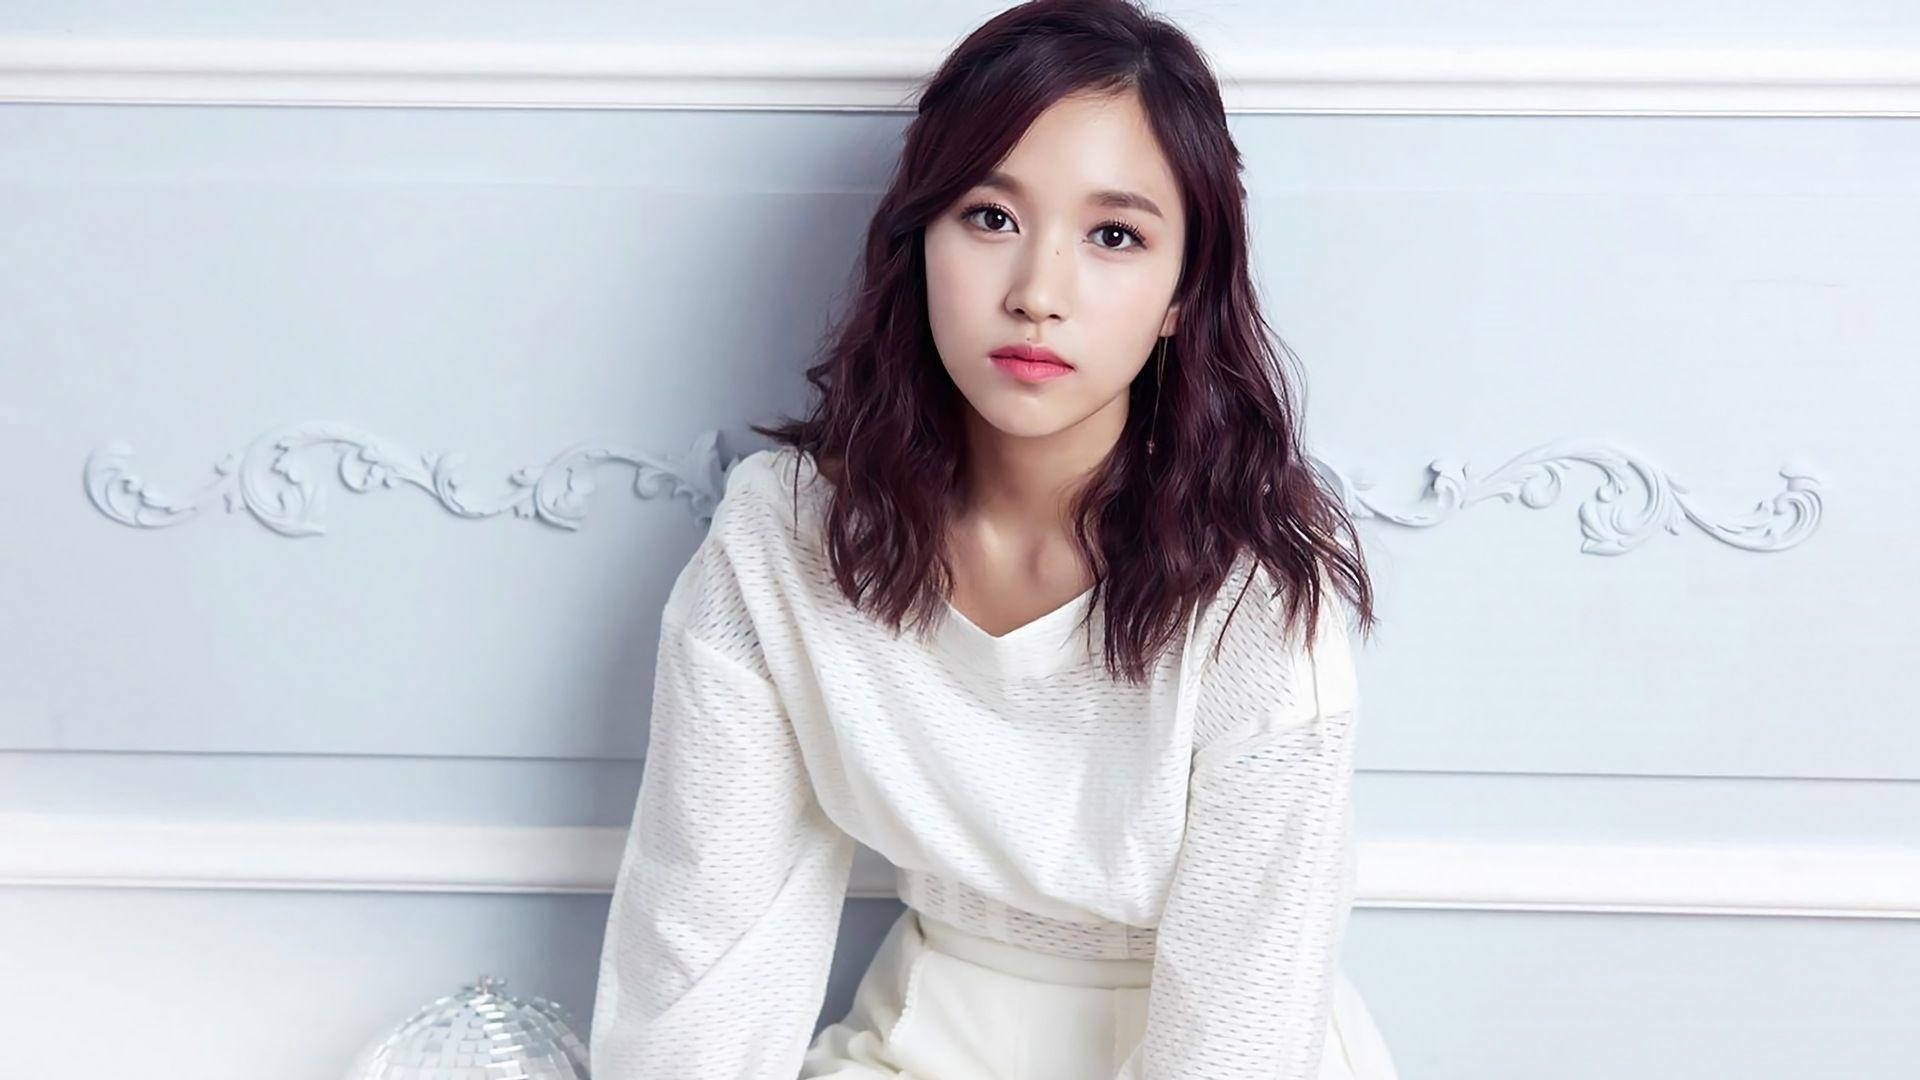 Free Twice Mina Picture, Twice Mina Picture for FREE